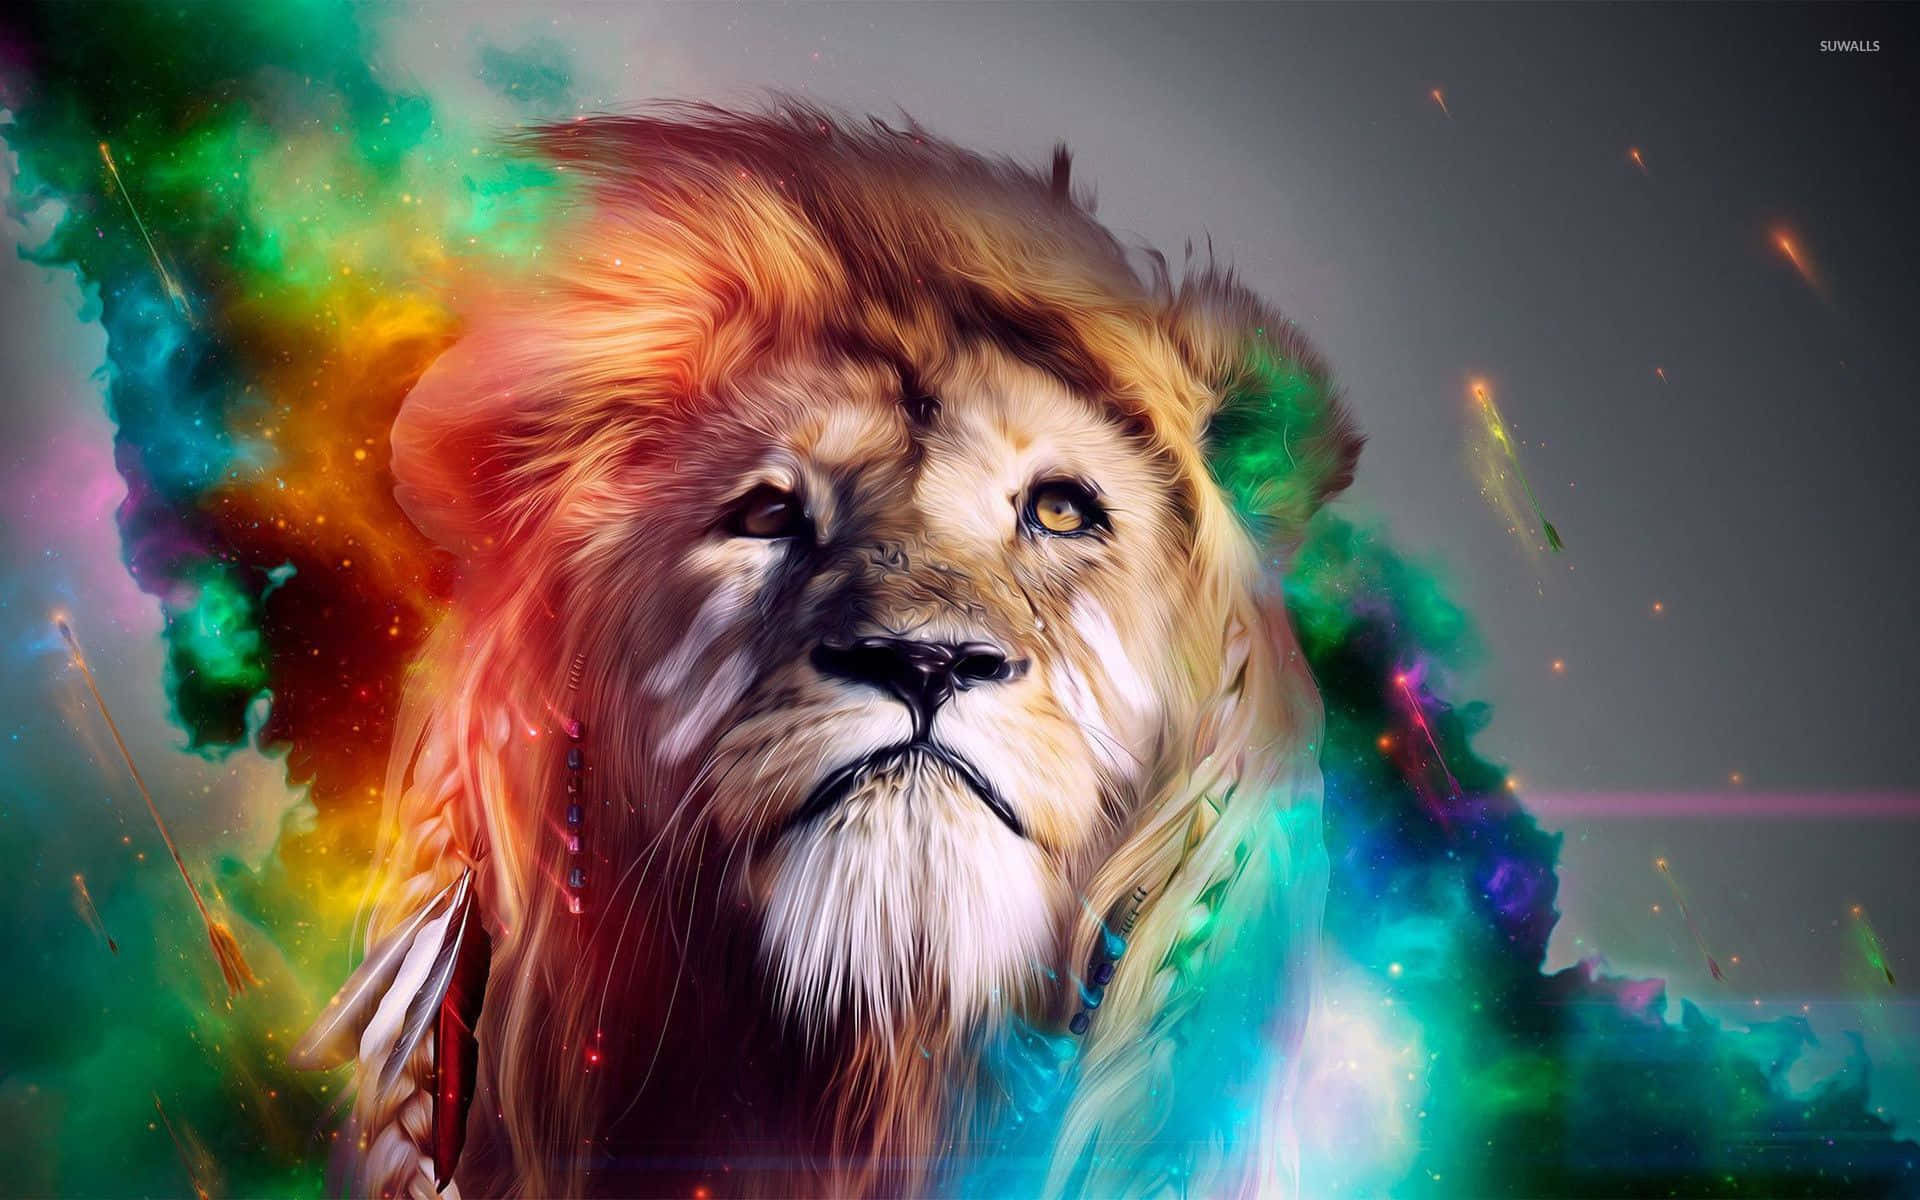 A majestic abstract lion with golden mane and tail. Wallpaper